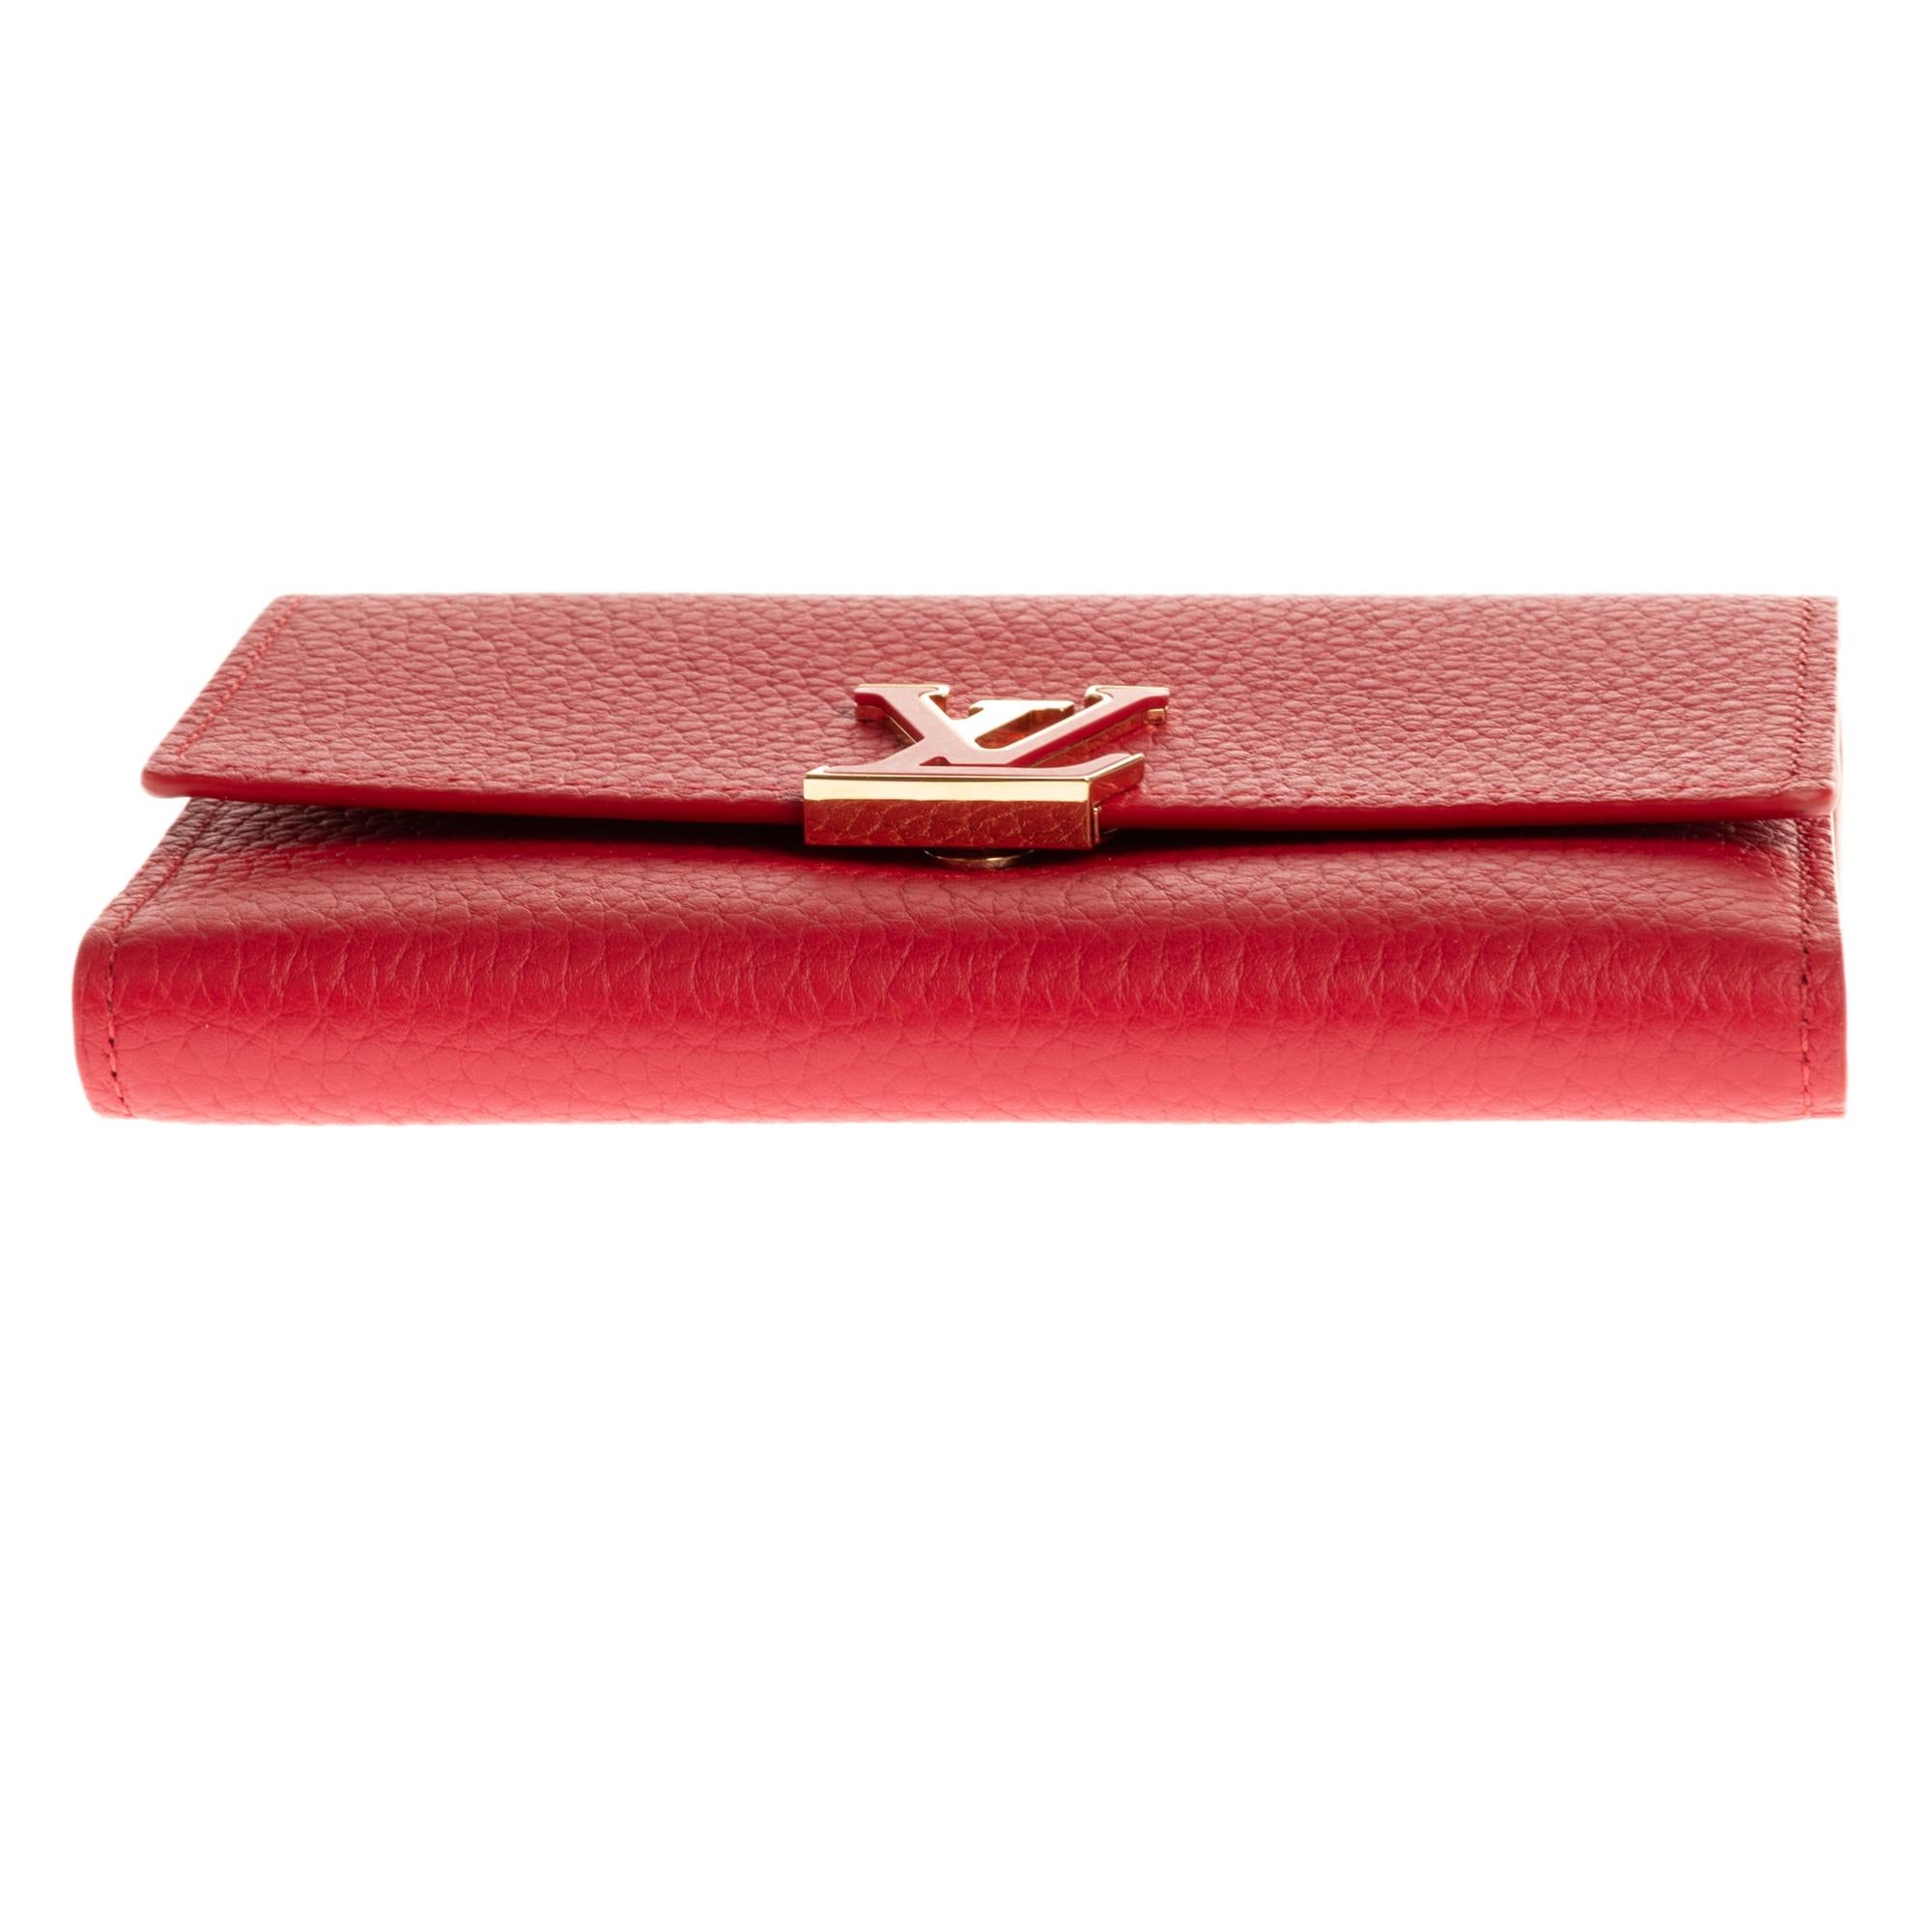 Brand New LV Capucines Compact Wallet in Red ecarlate Taurillon leather  1